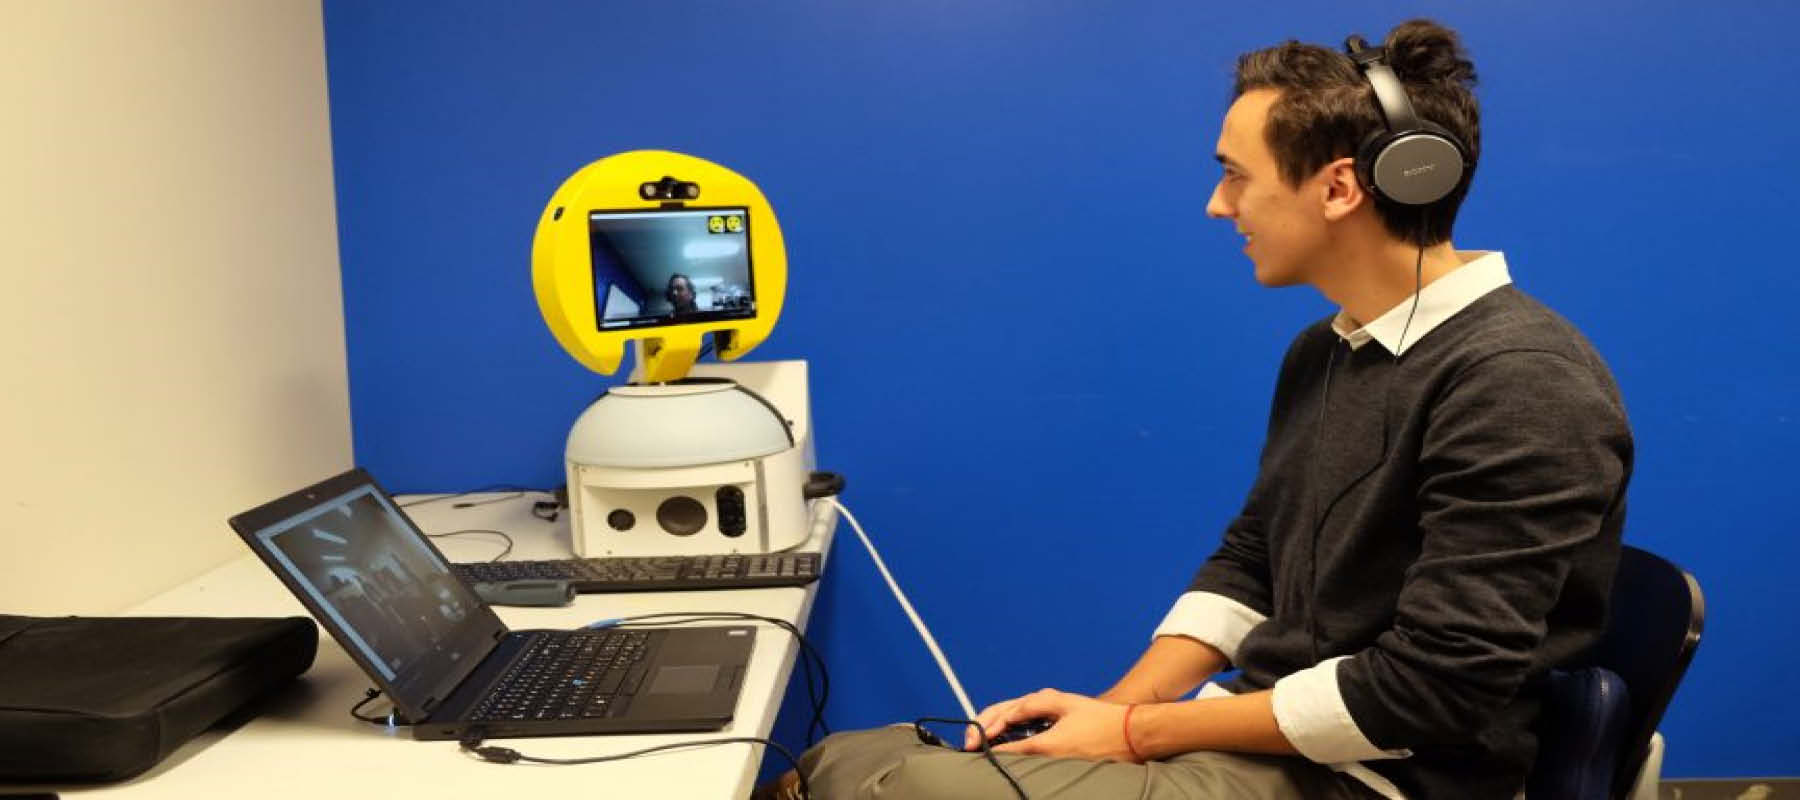 Grosu, an undergraduate student employee, sits smiling with headphones on and looking into a yellow circular, rotating screen to another person online for an accessible video conferencing application called WebMoti